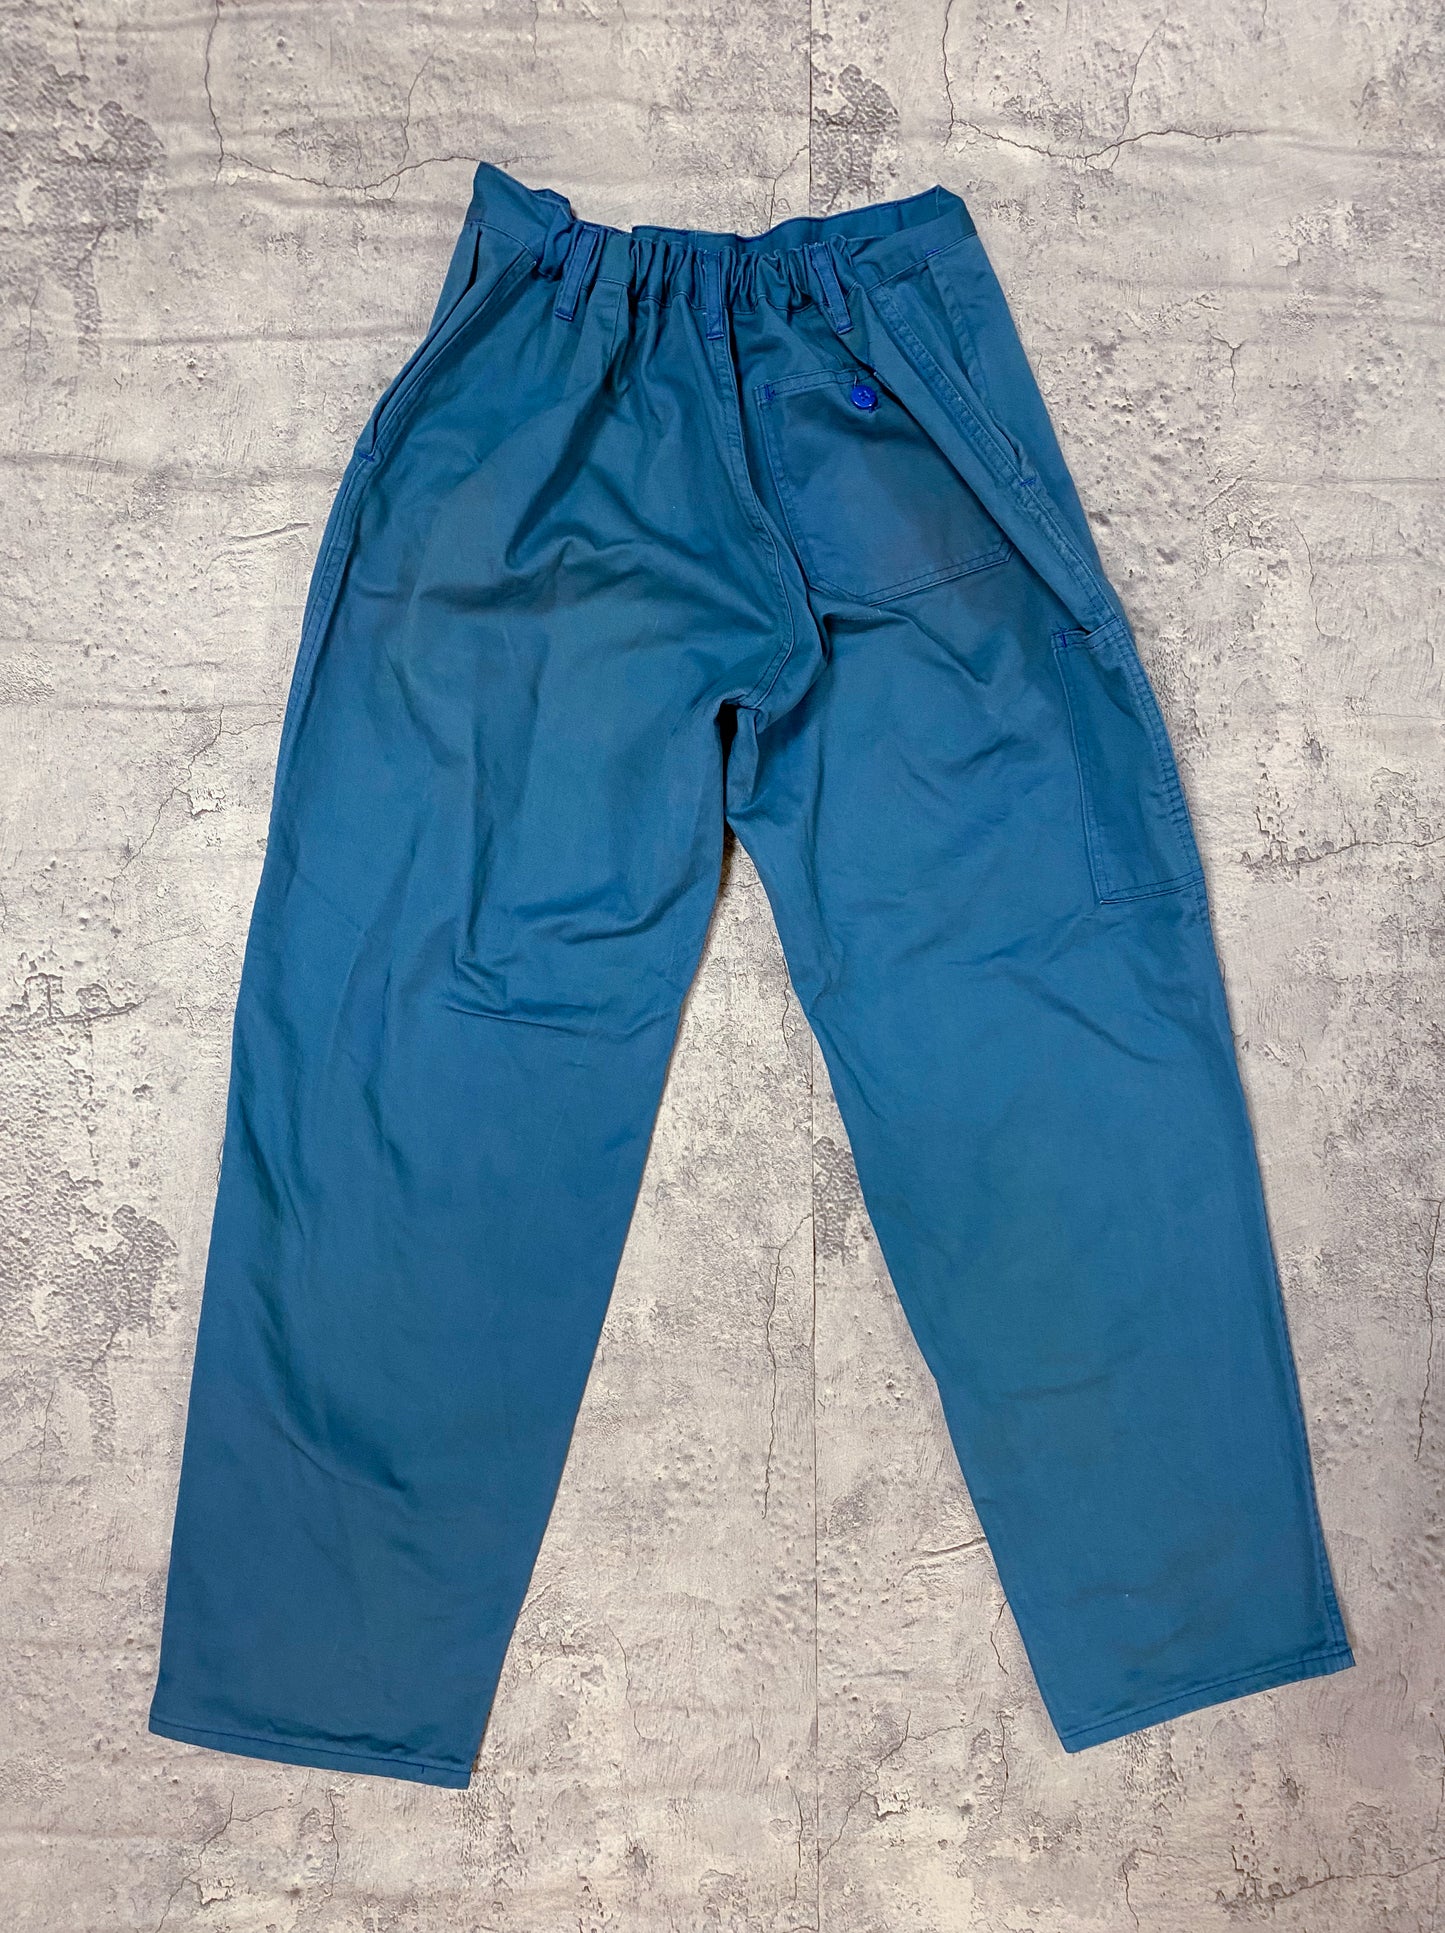 EURO French Work Pants vintage 80s